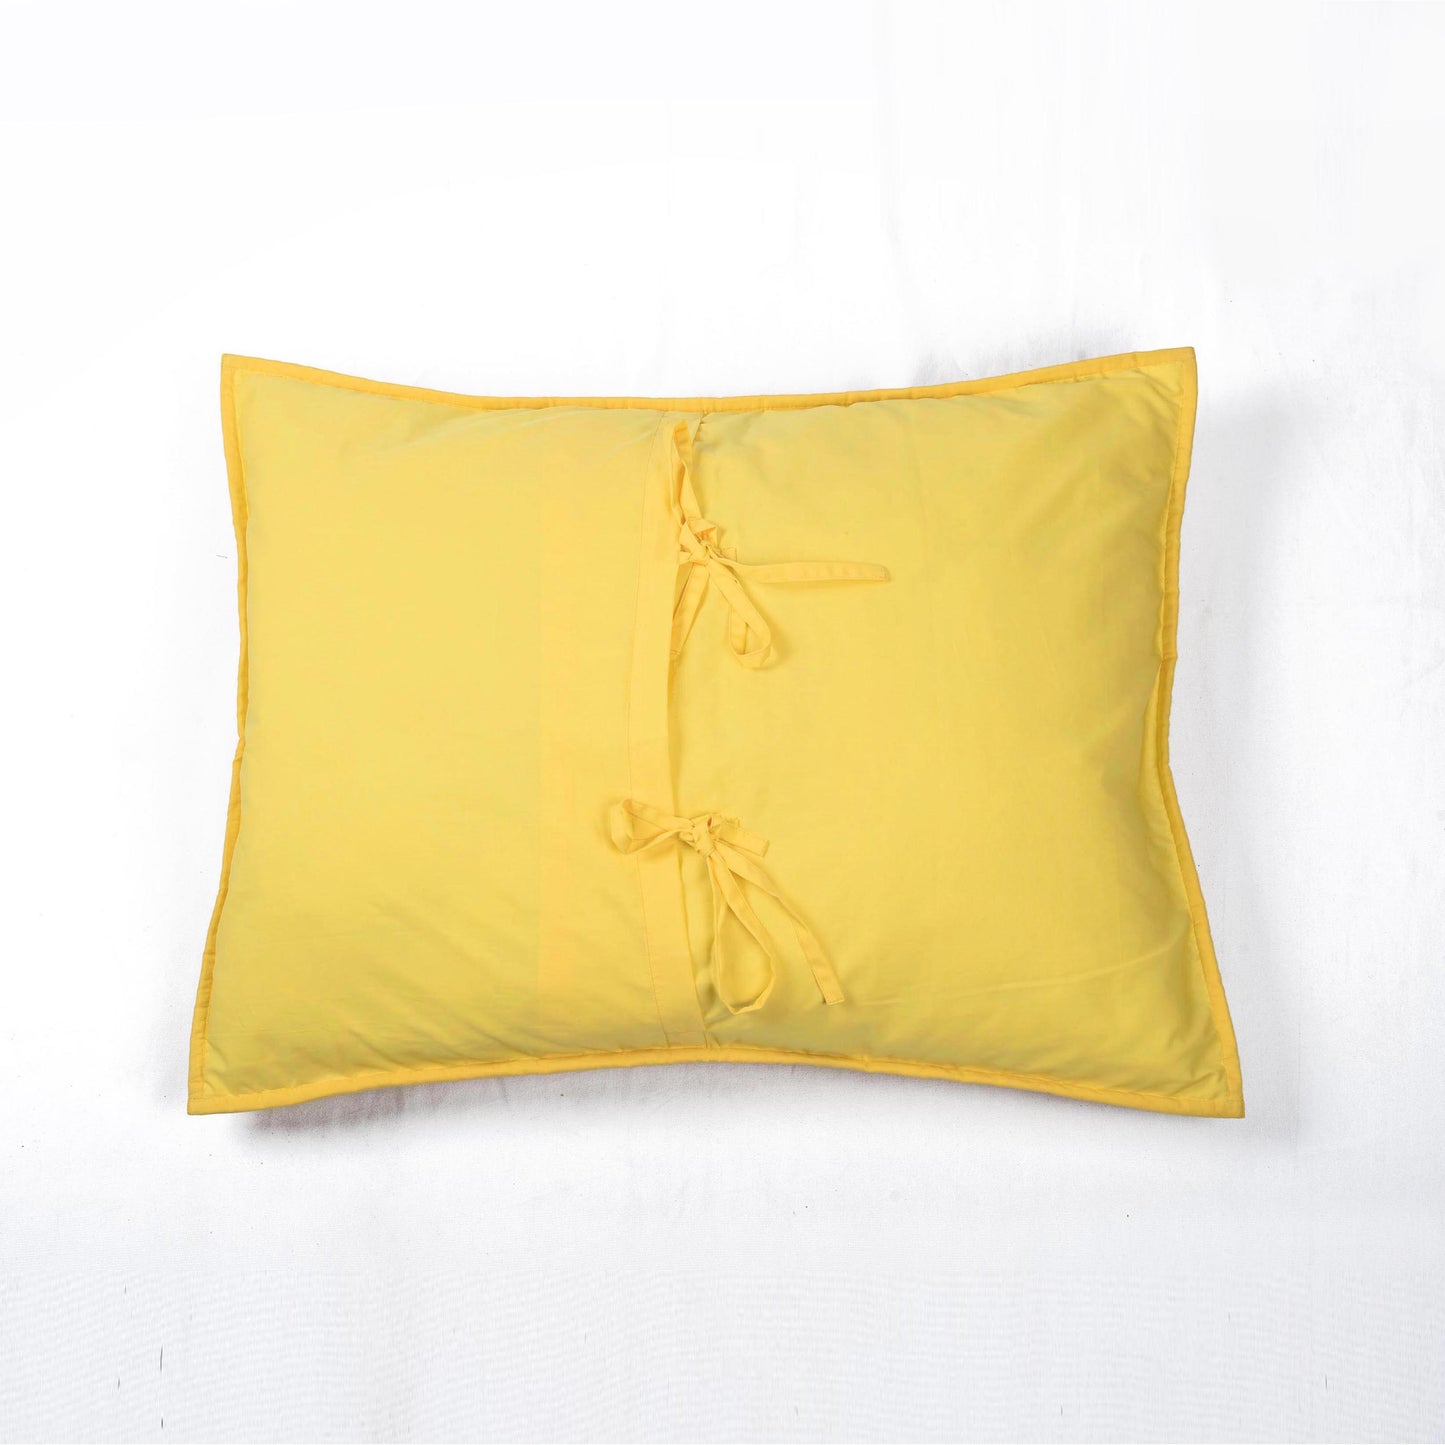 YELLOW Kantha quilt - chevron pattern quilted Pillow cases, sizes available